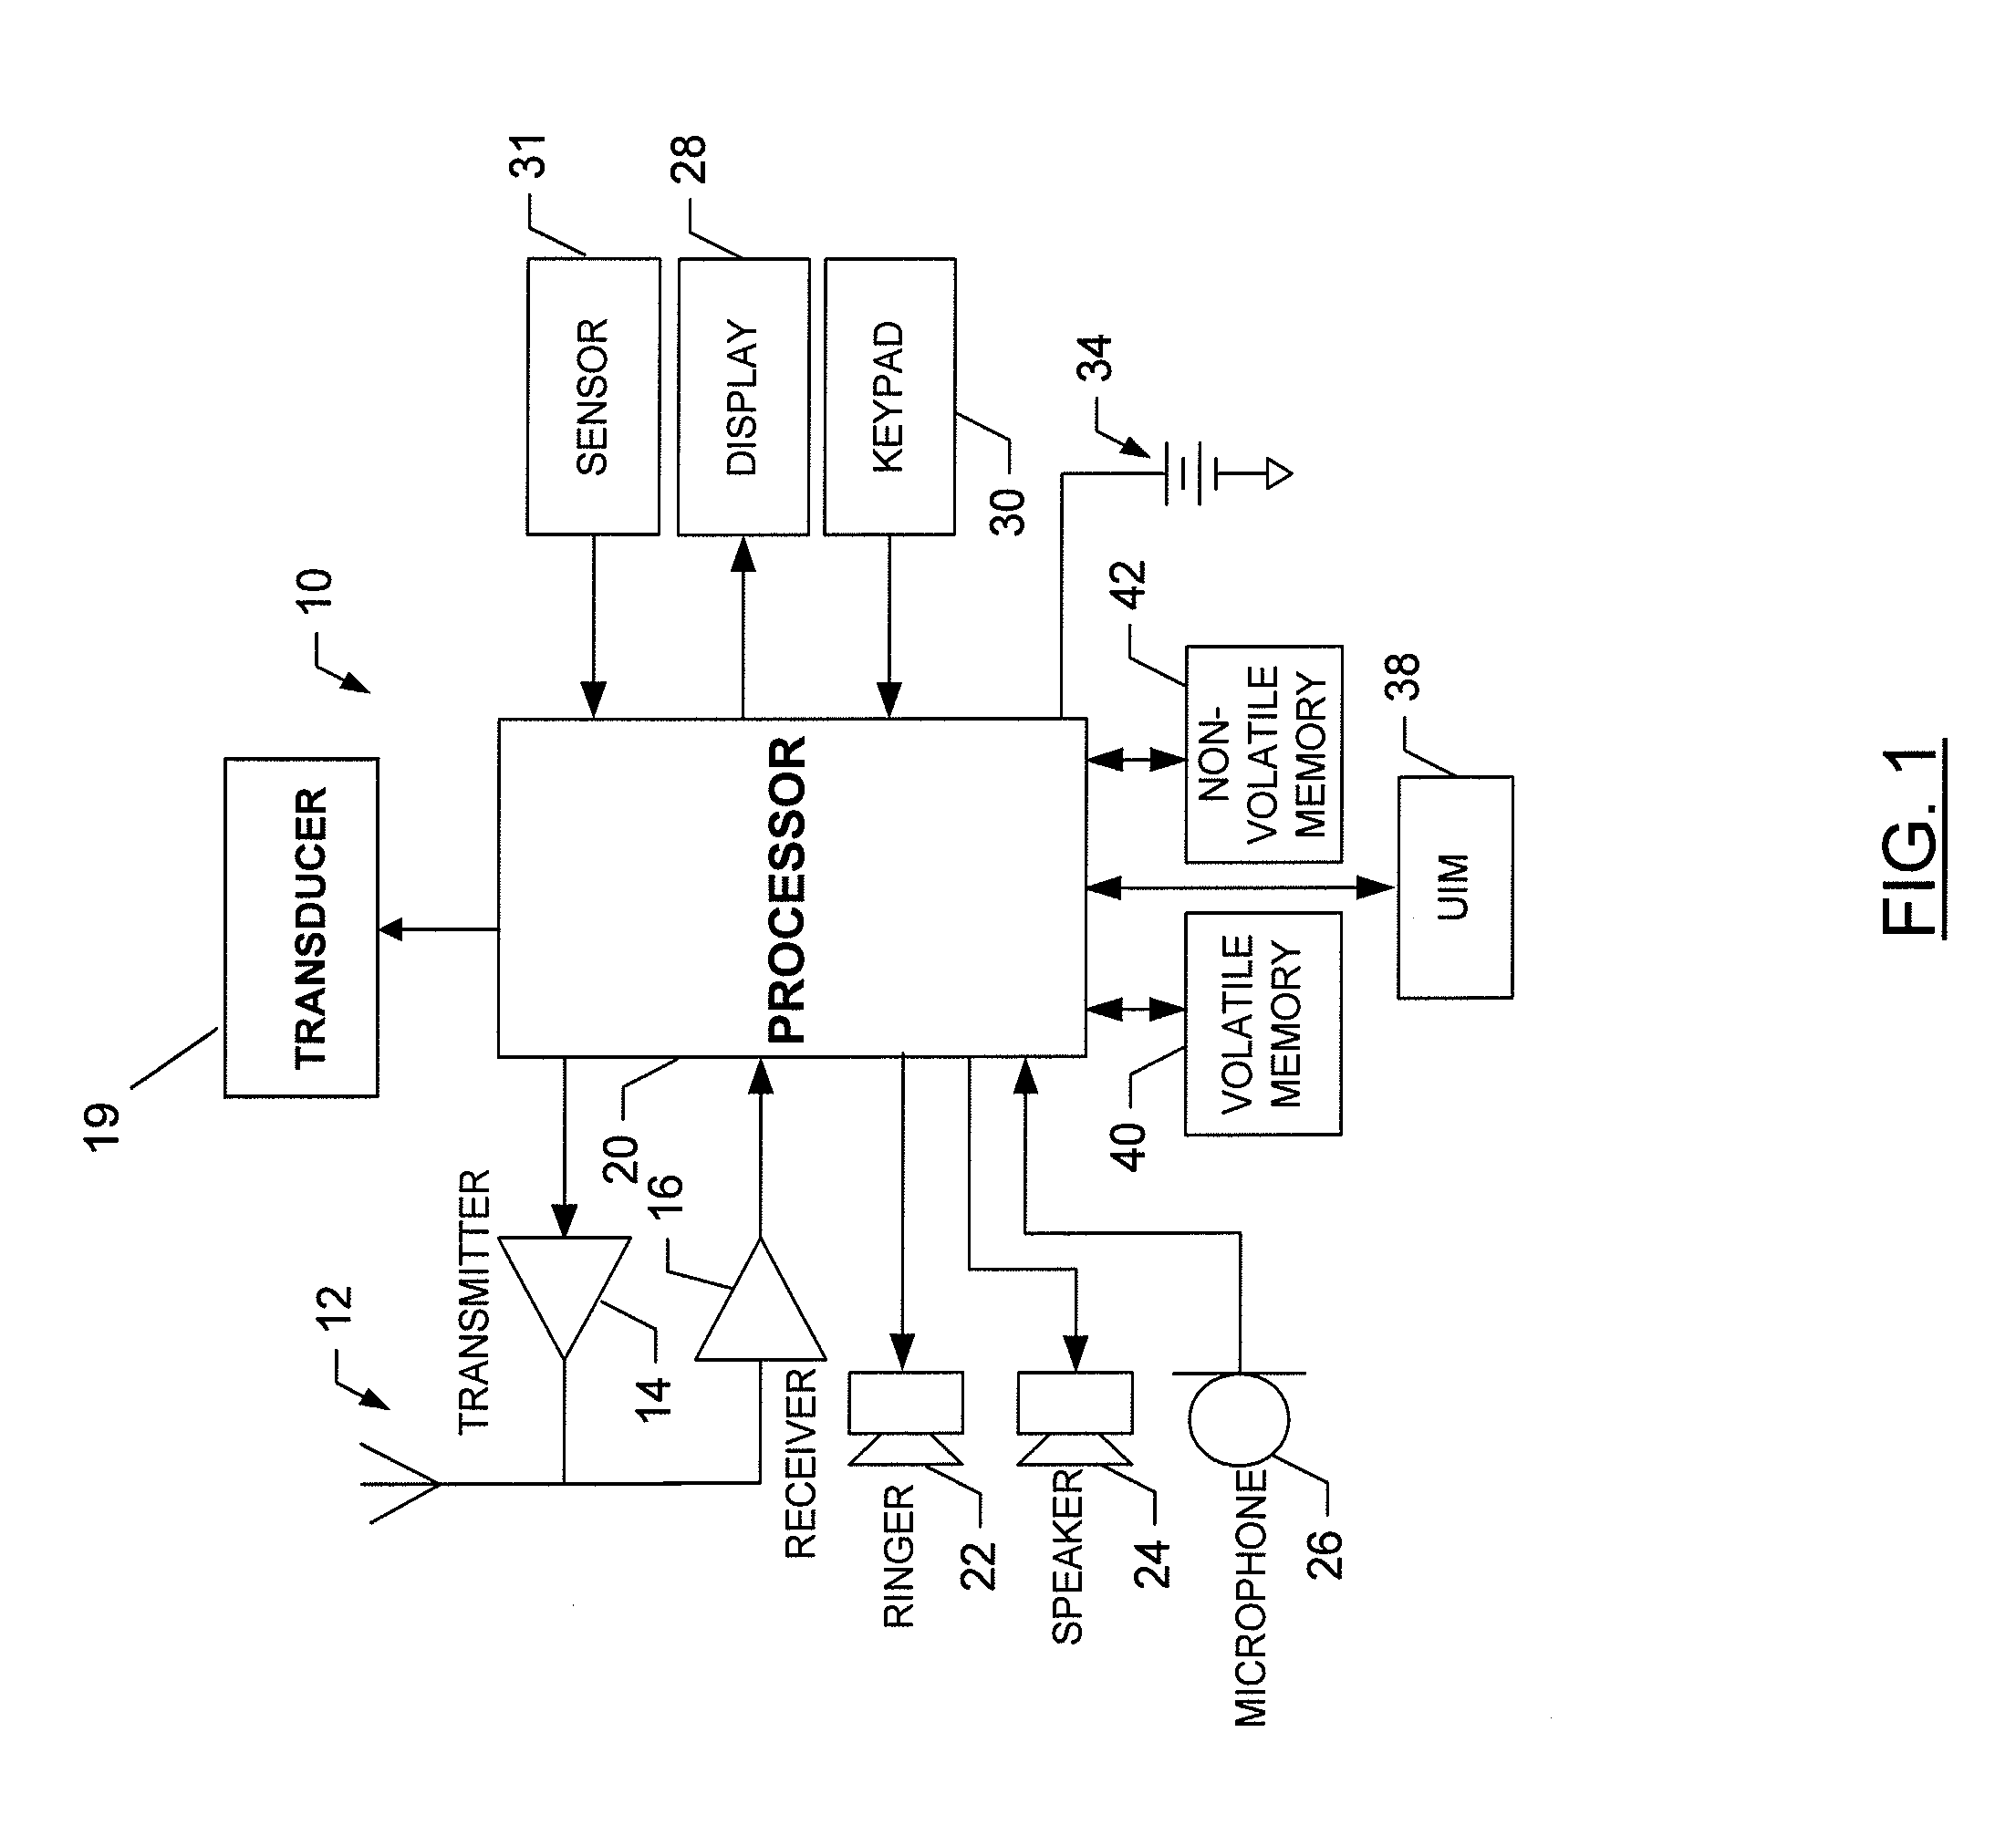 Method and apparatus for providing input through an apparatus configured to provide for display of an image